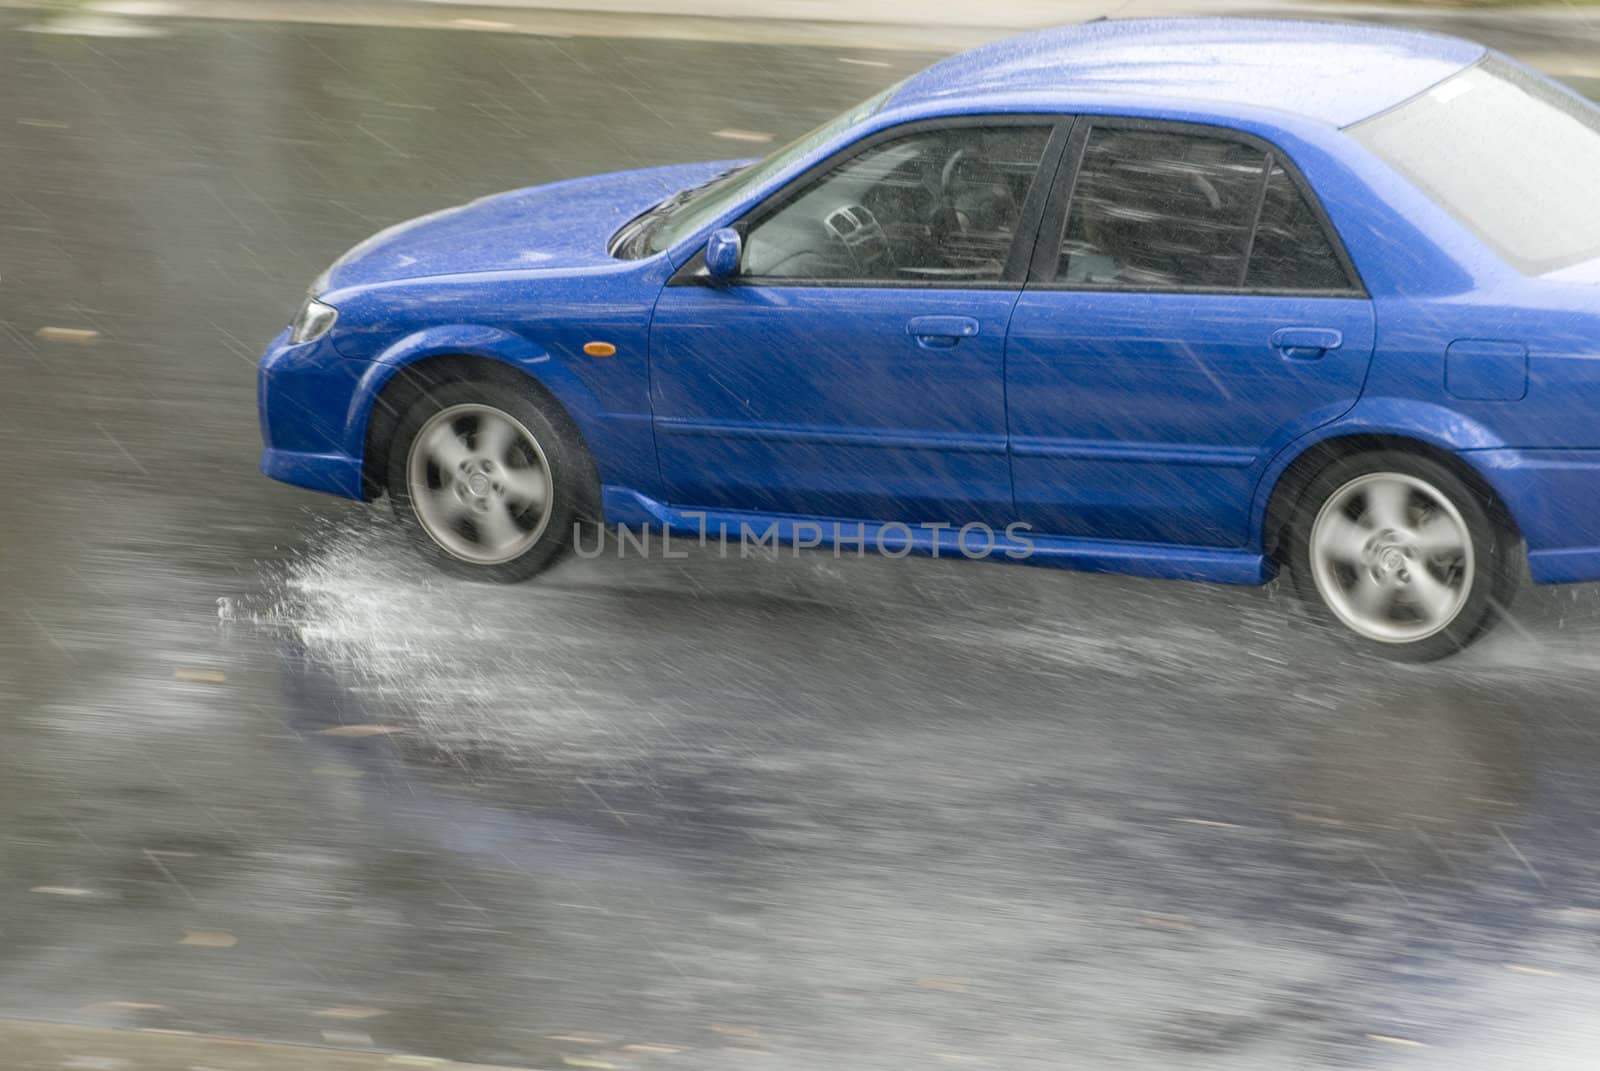 driving in dangerous conditions on a wet road